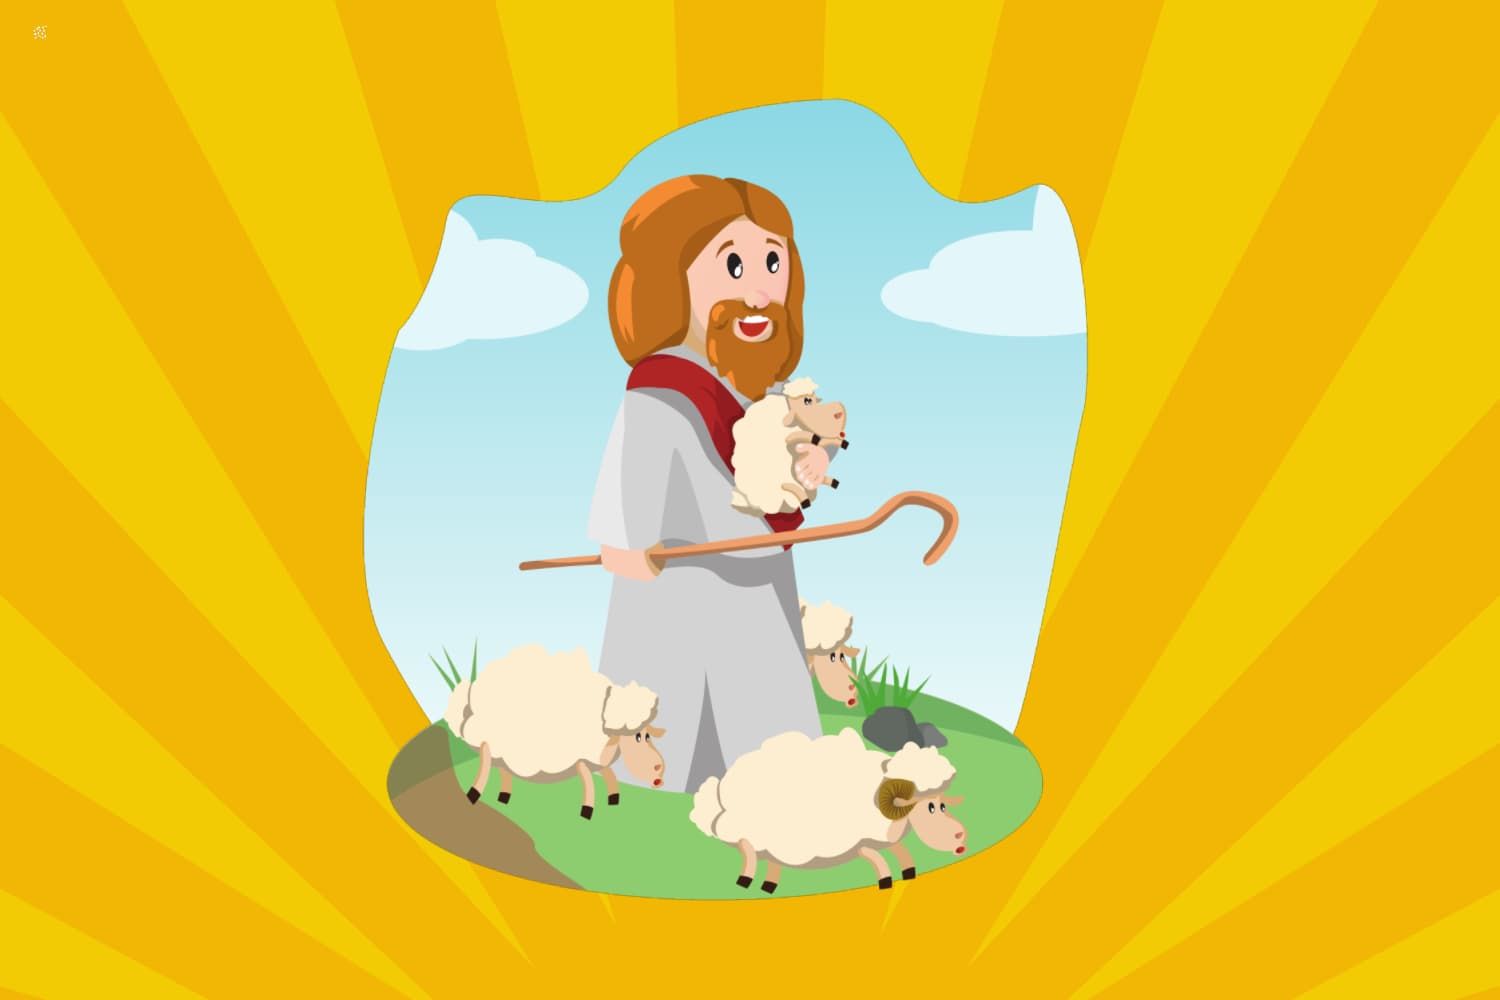 Childrens%20moment%20-%20NT%20Teaching%20on%20the%20good%20shepherd%20-%20Recognizing%20the%20shepherds%20voice%202-62442aa4 Jesus - His teaching